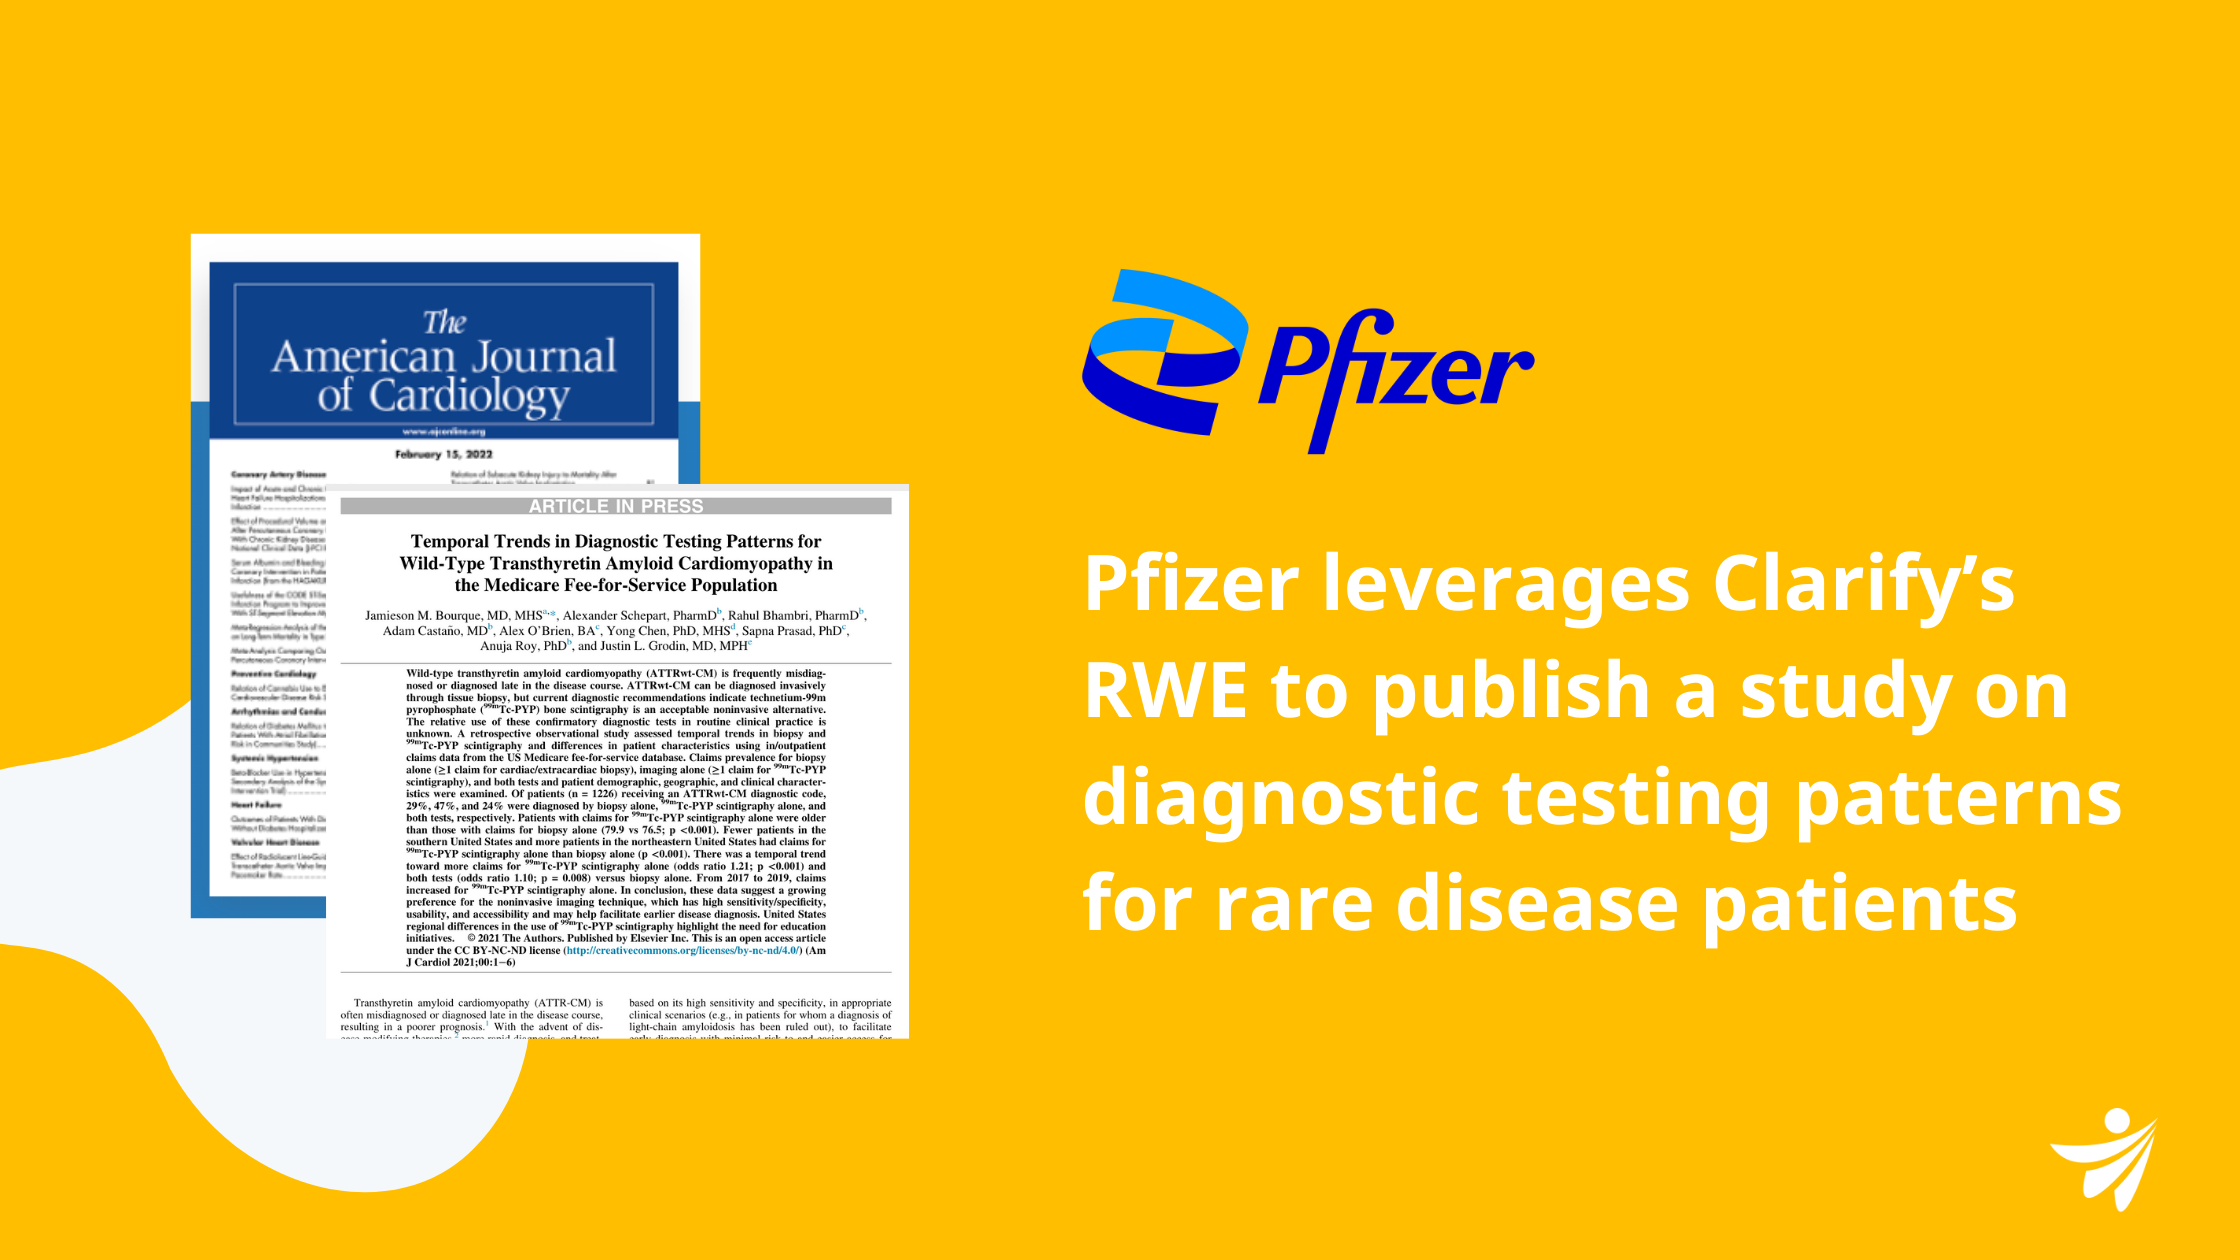 Pfizer leverages Clarify's RWE to publish a study on diagnostic testing patterns for rare disease patients